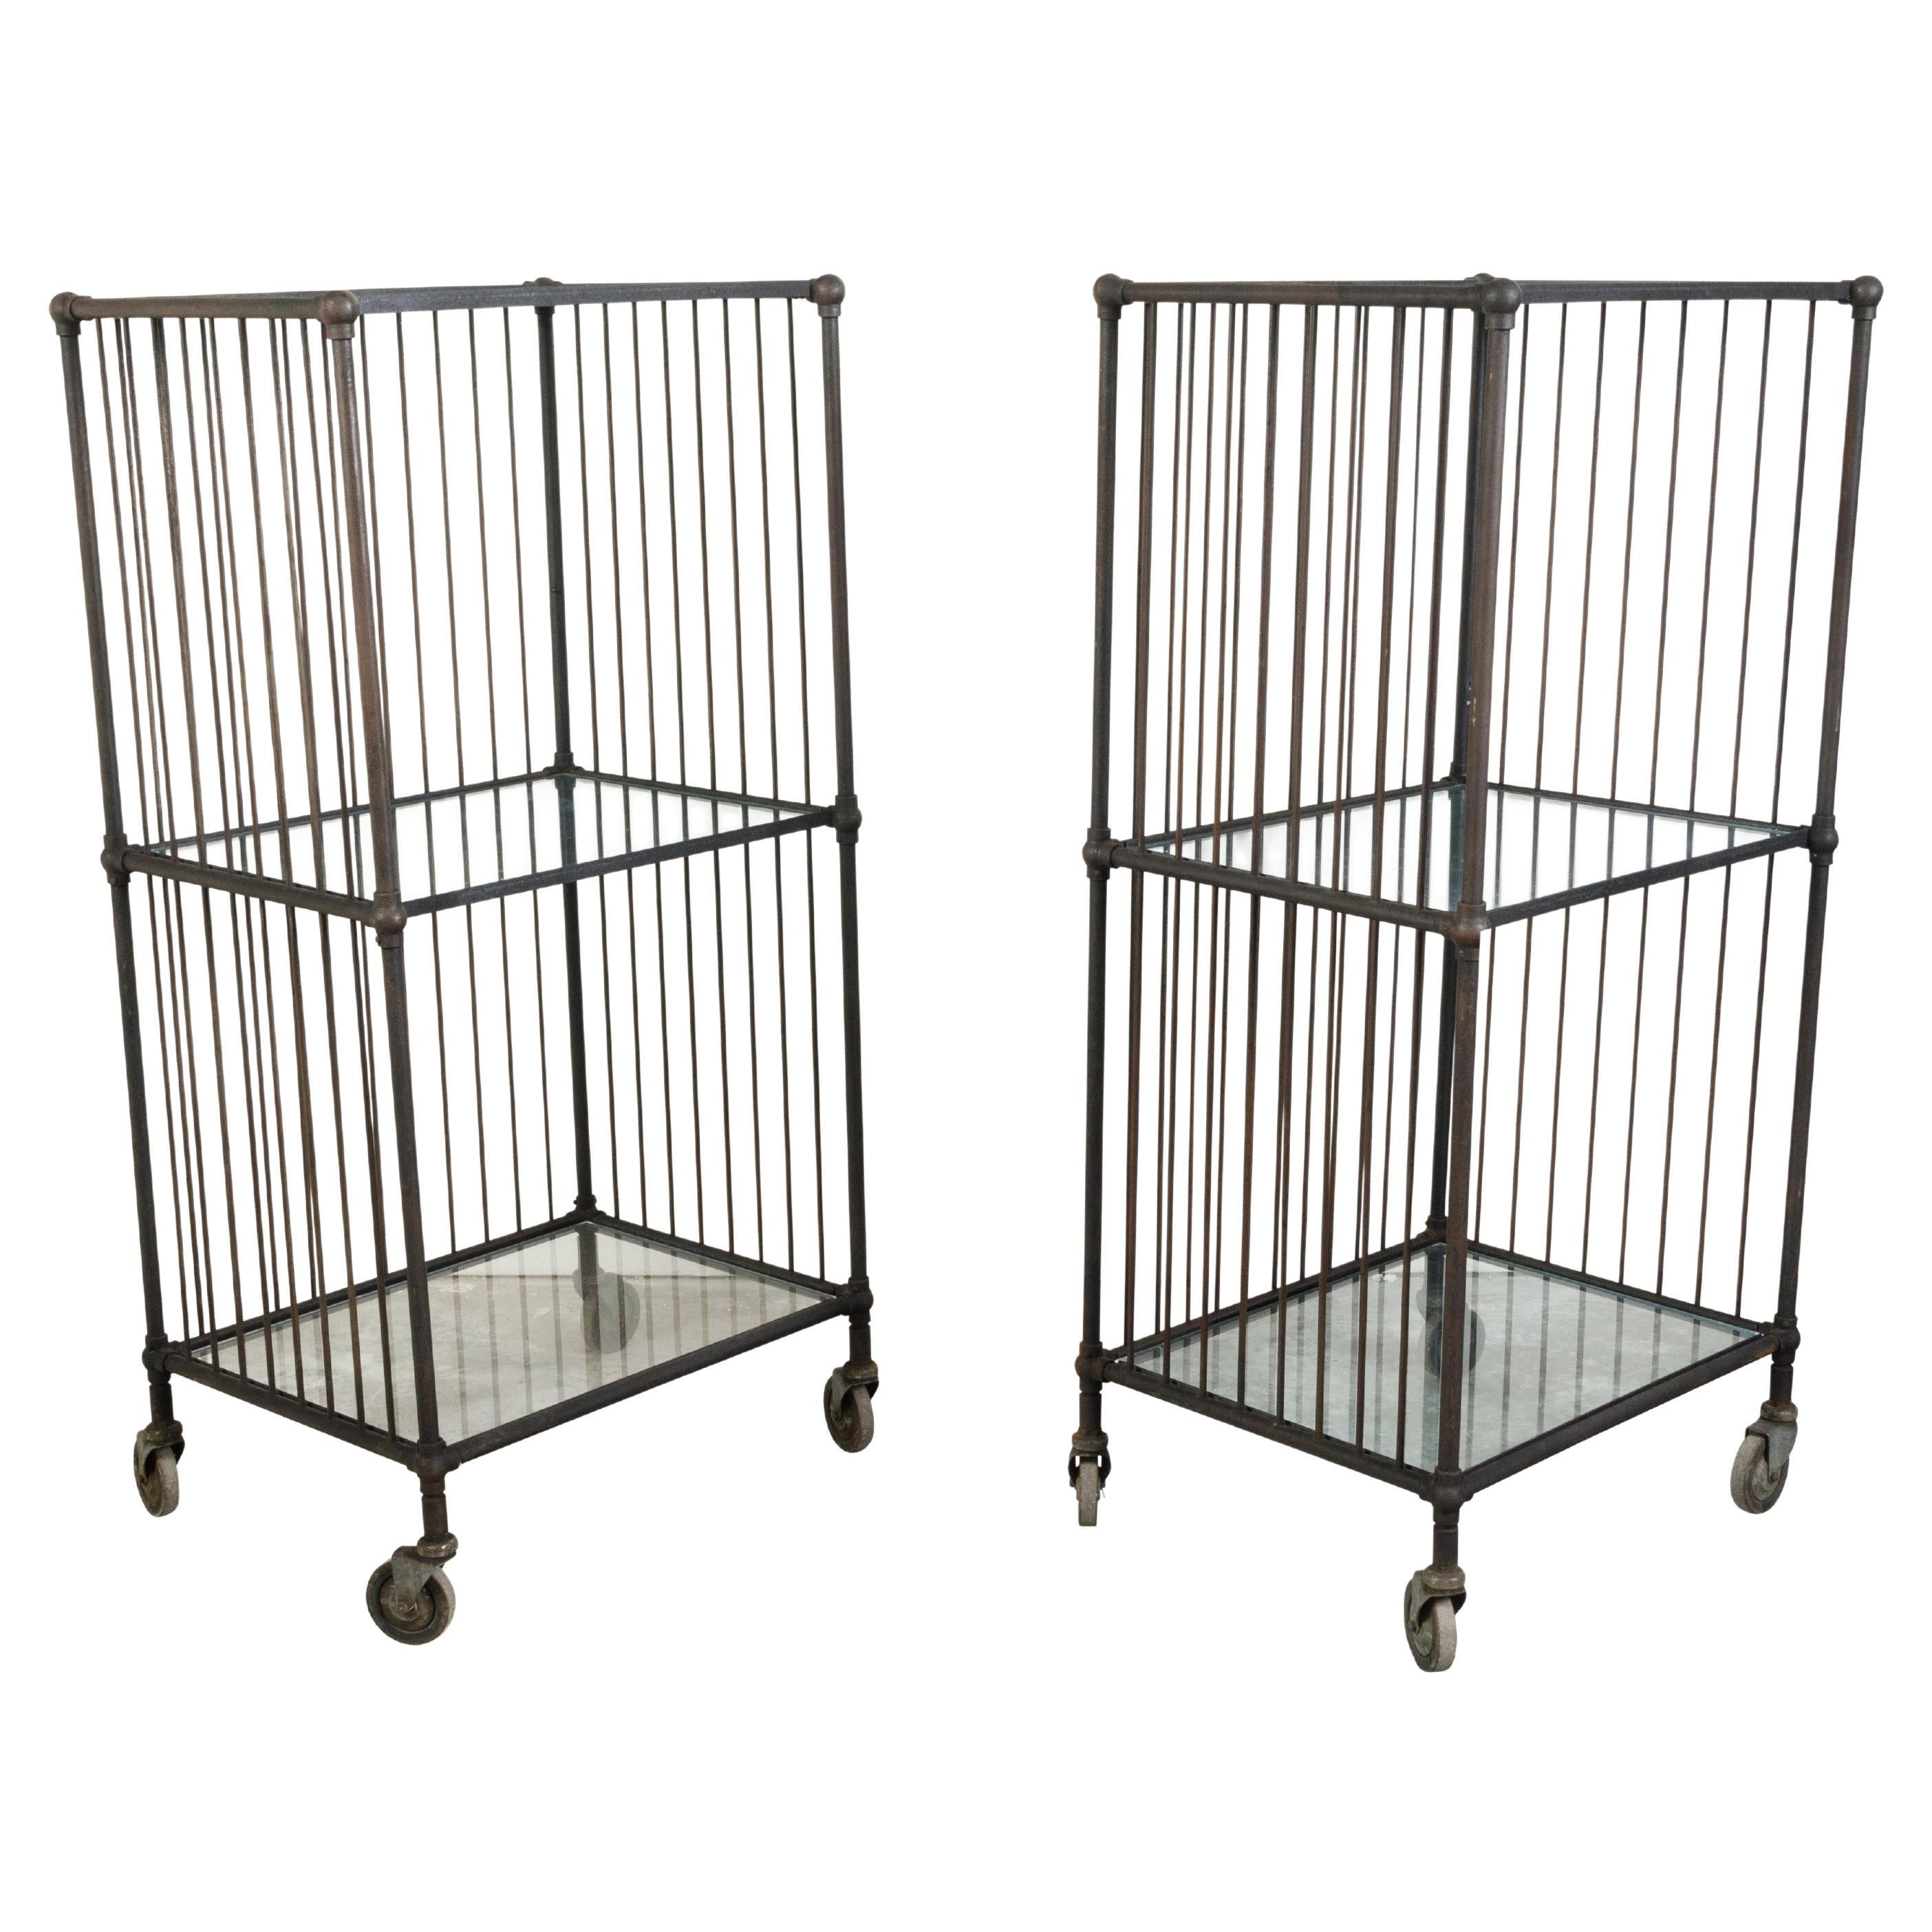 Vintage Industrial Carts with Glass Shelves and Casters, Sold Individually